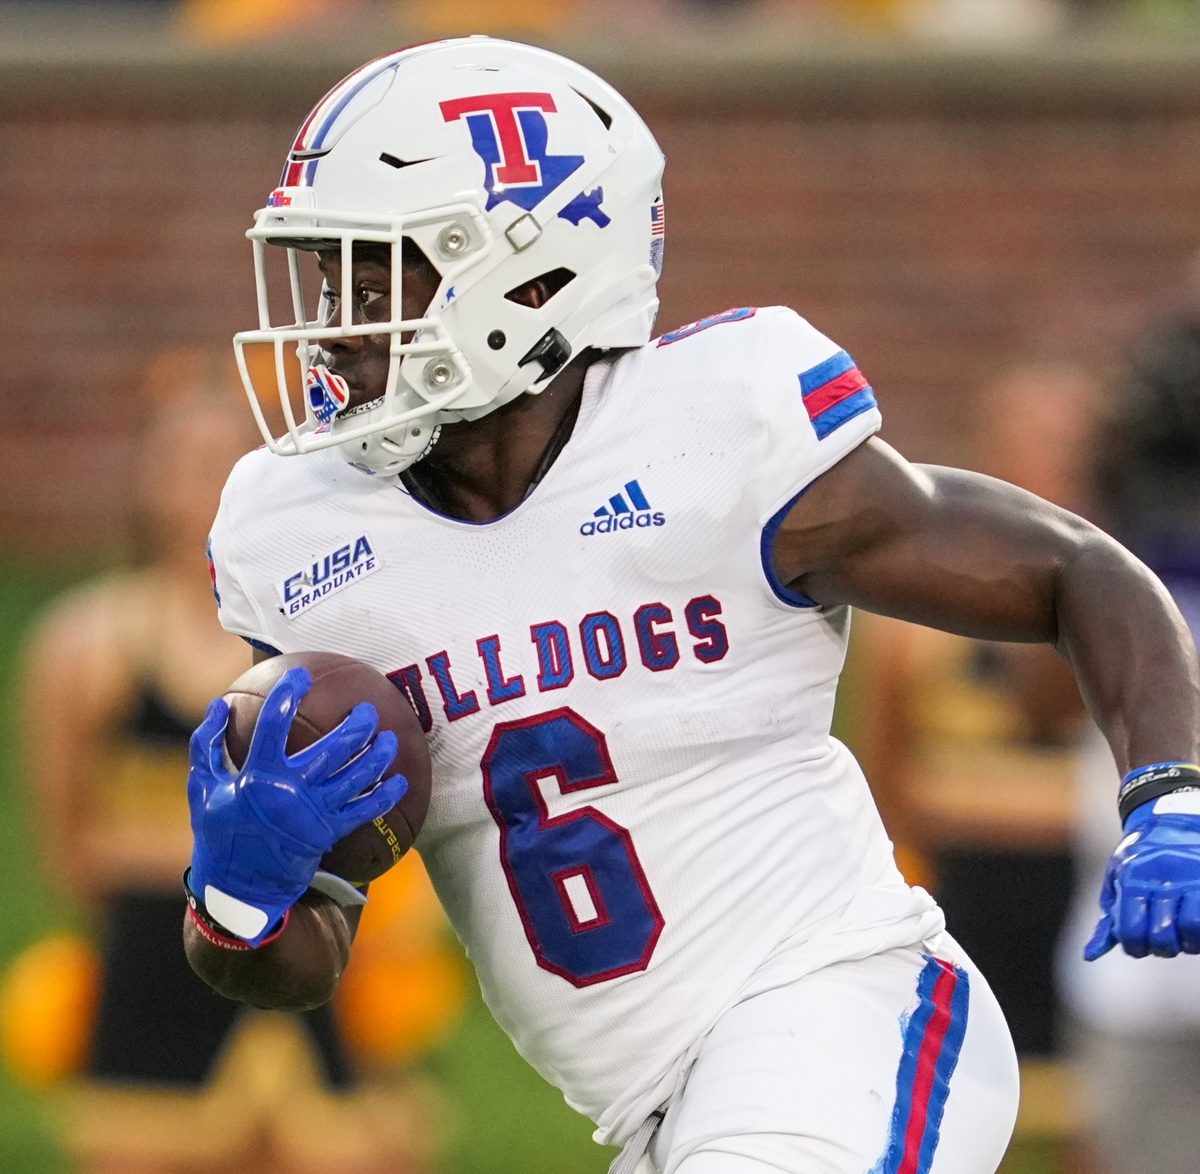 UAB vs. Louisiana Tech Prediction, Preview, and Odds - 11-26-2022